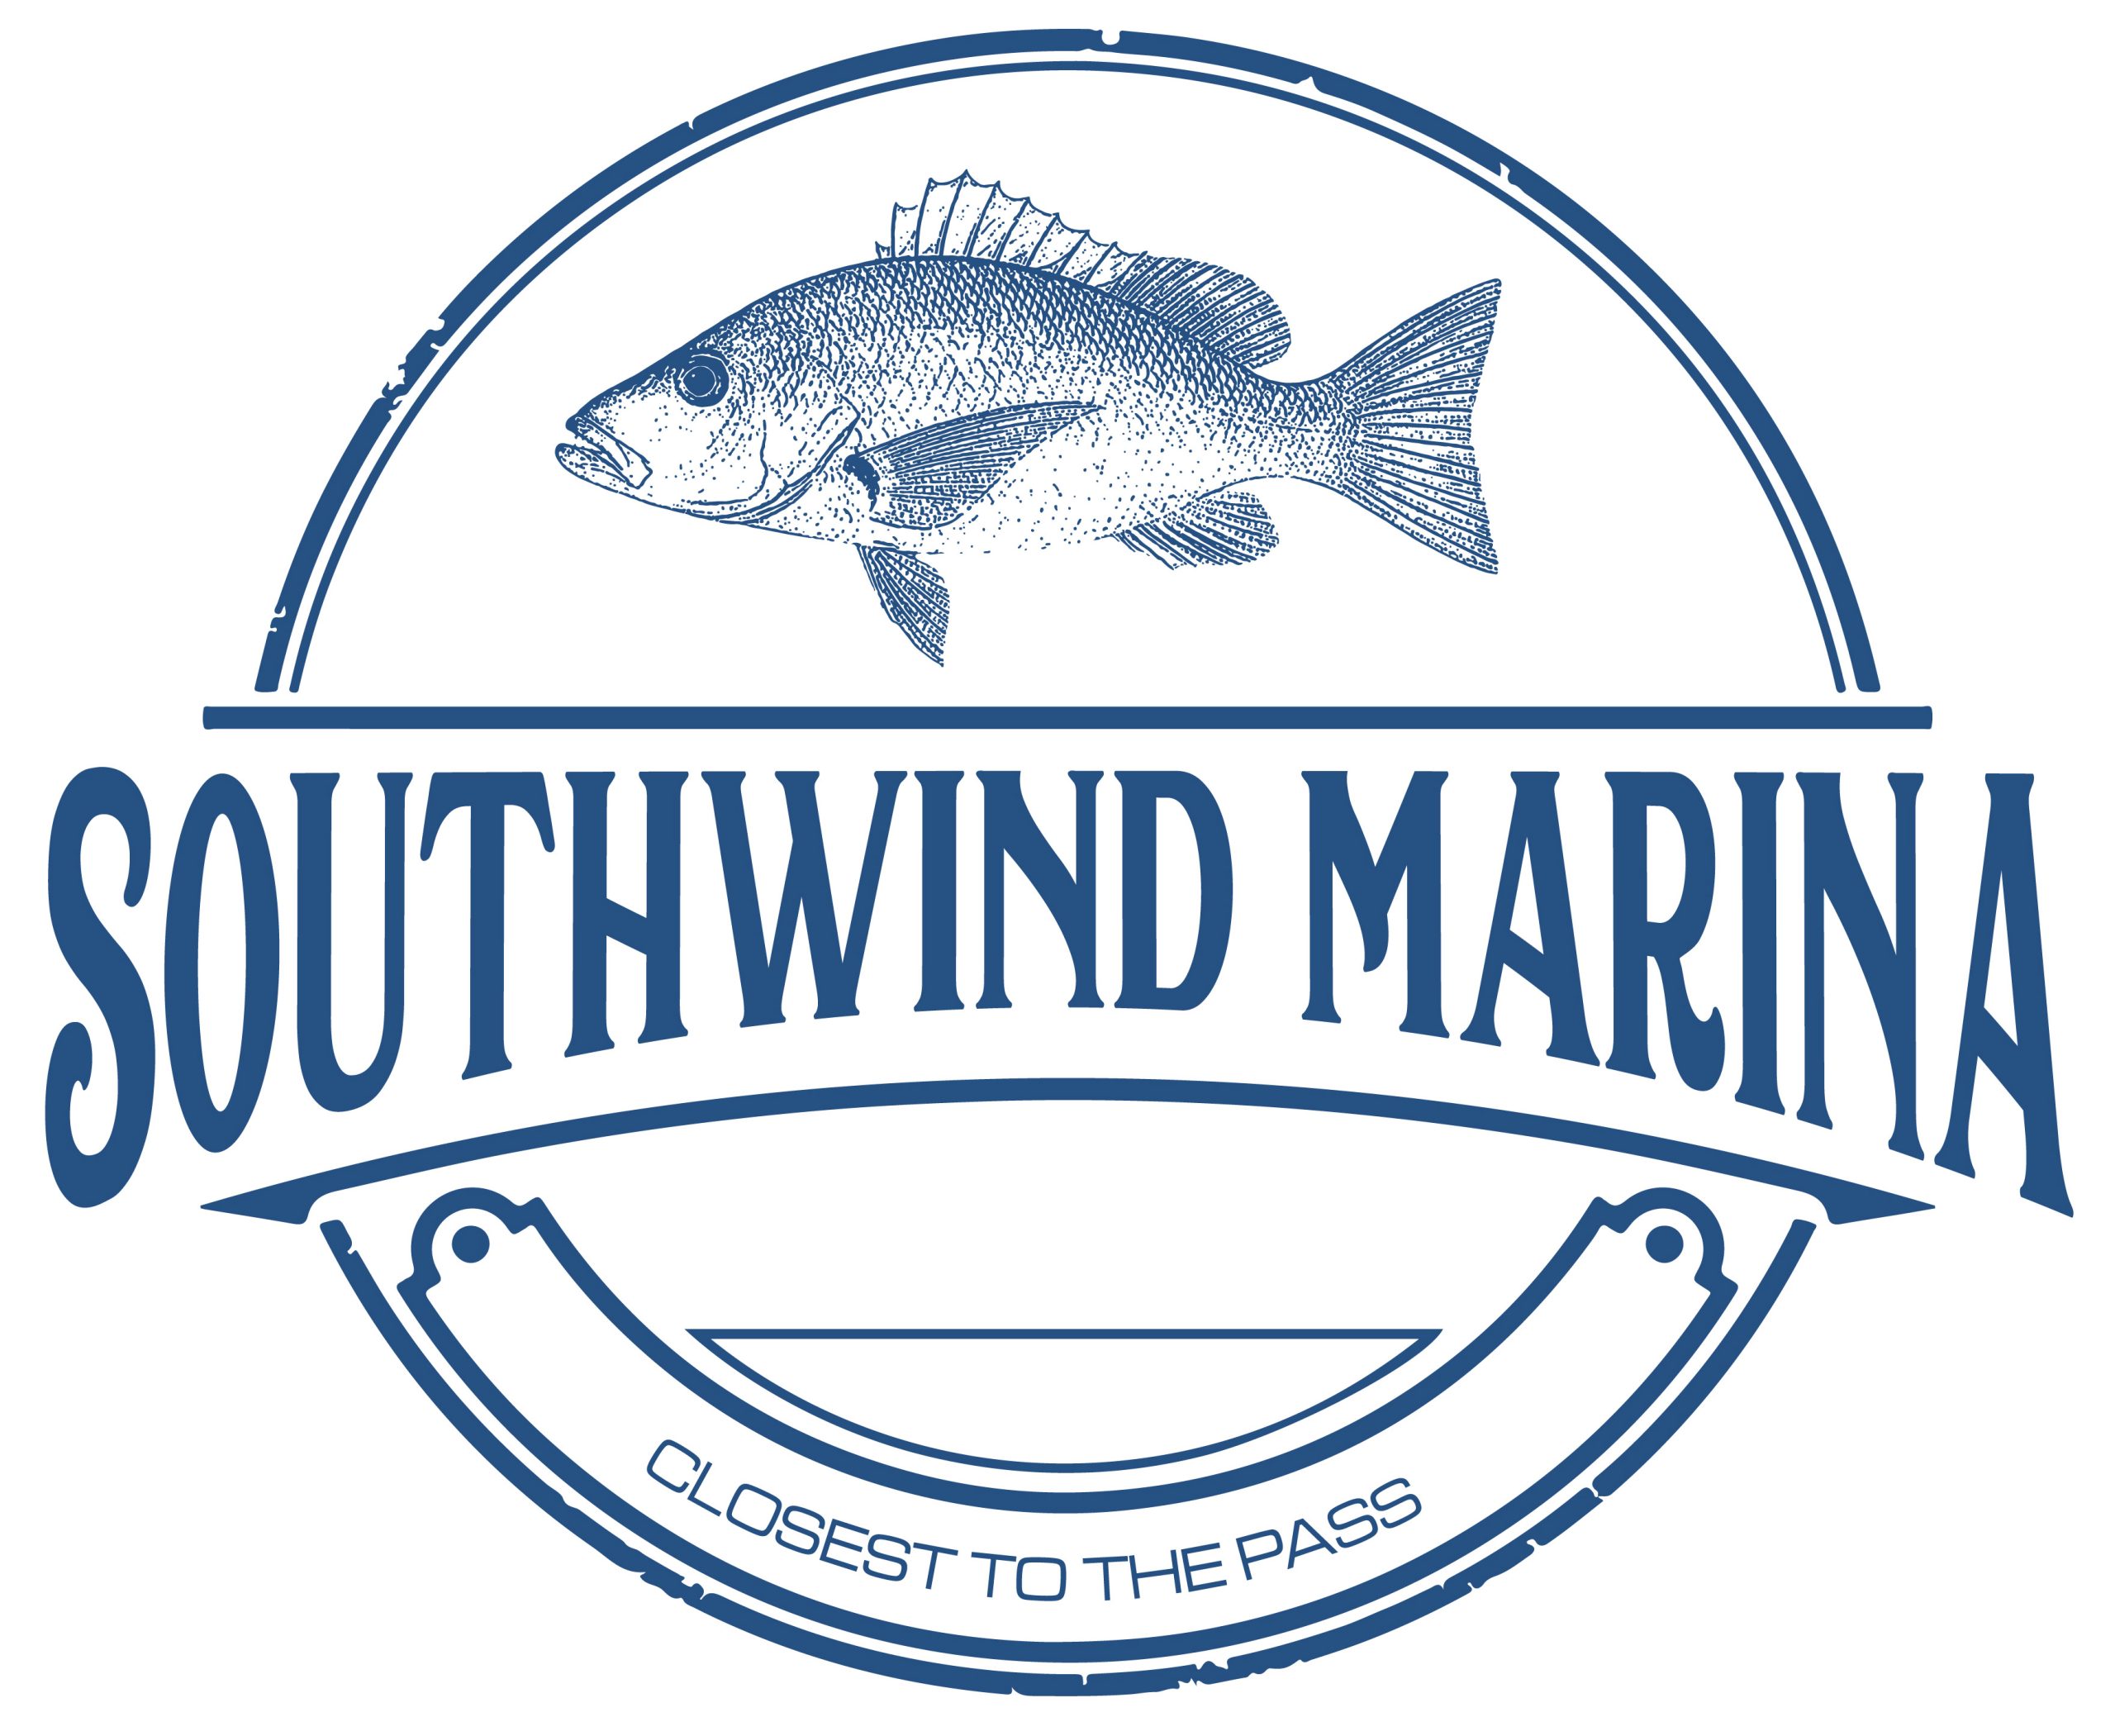 South Wind Marina - Closest to the Pass